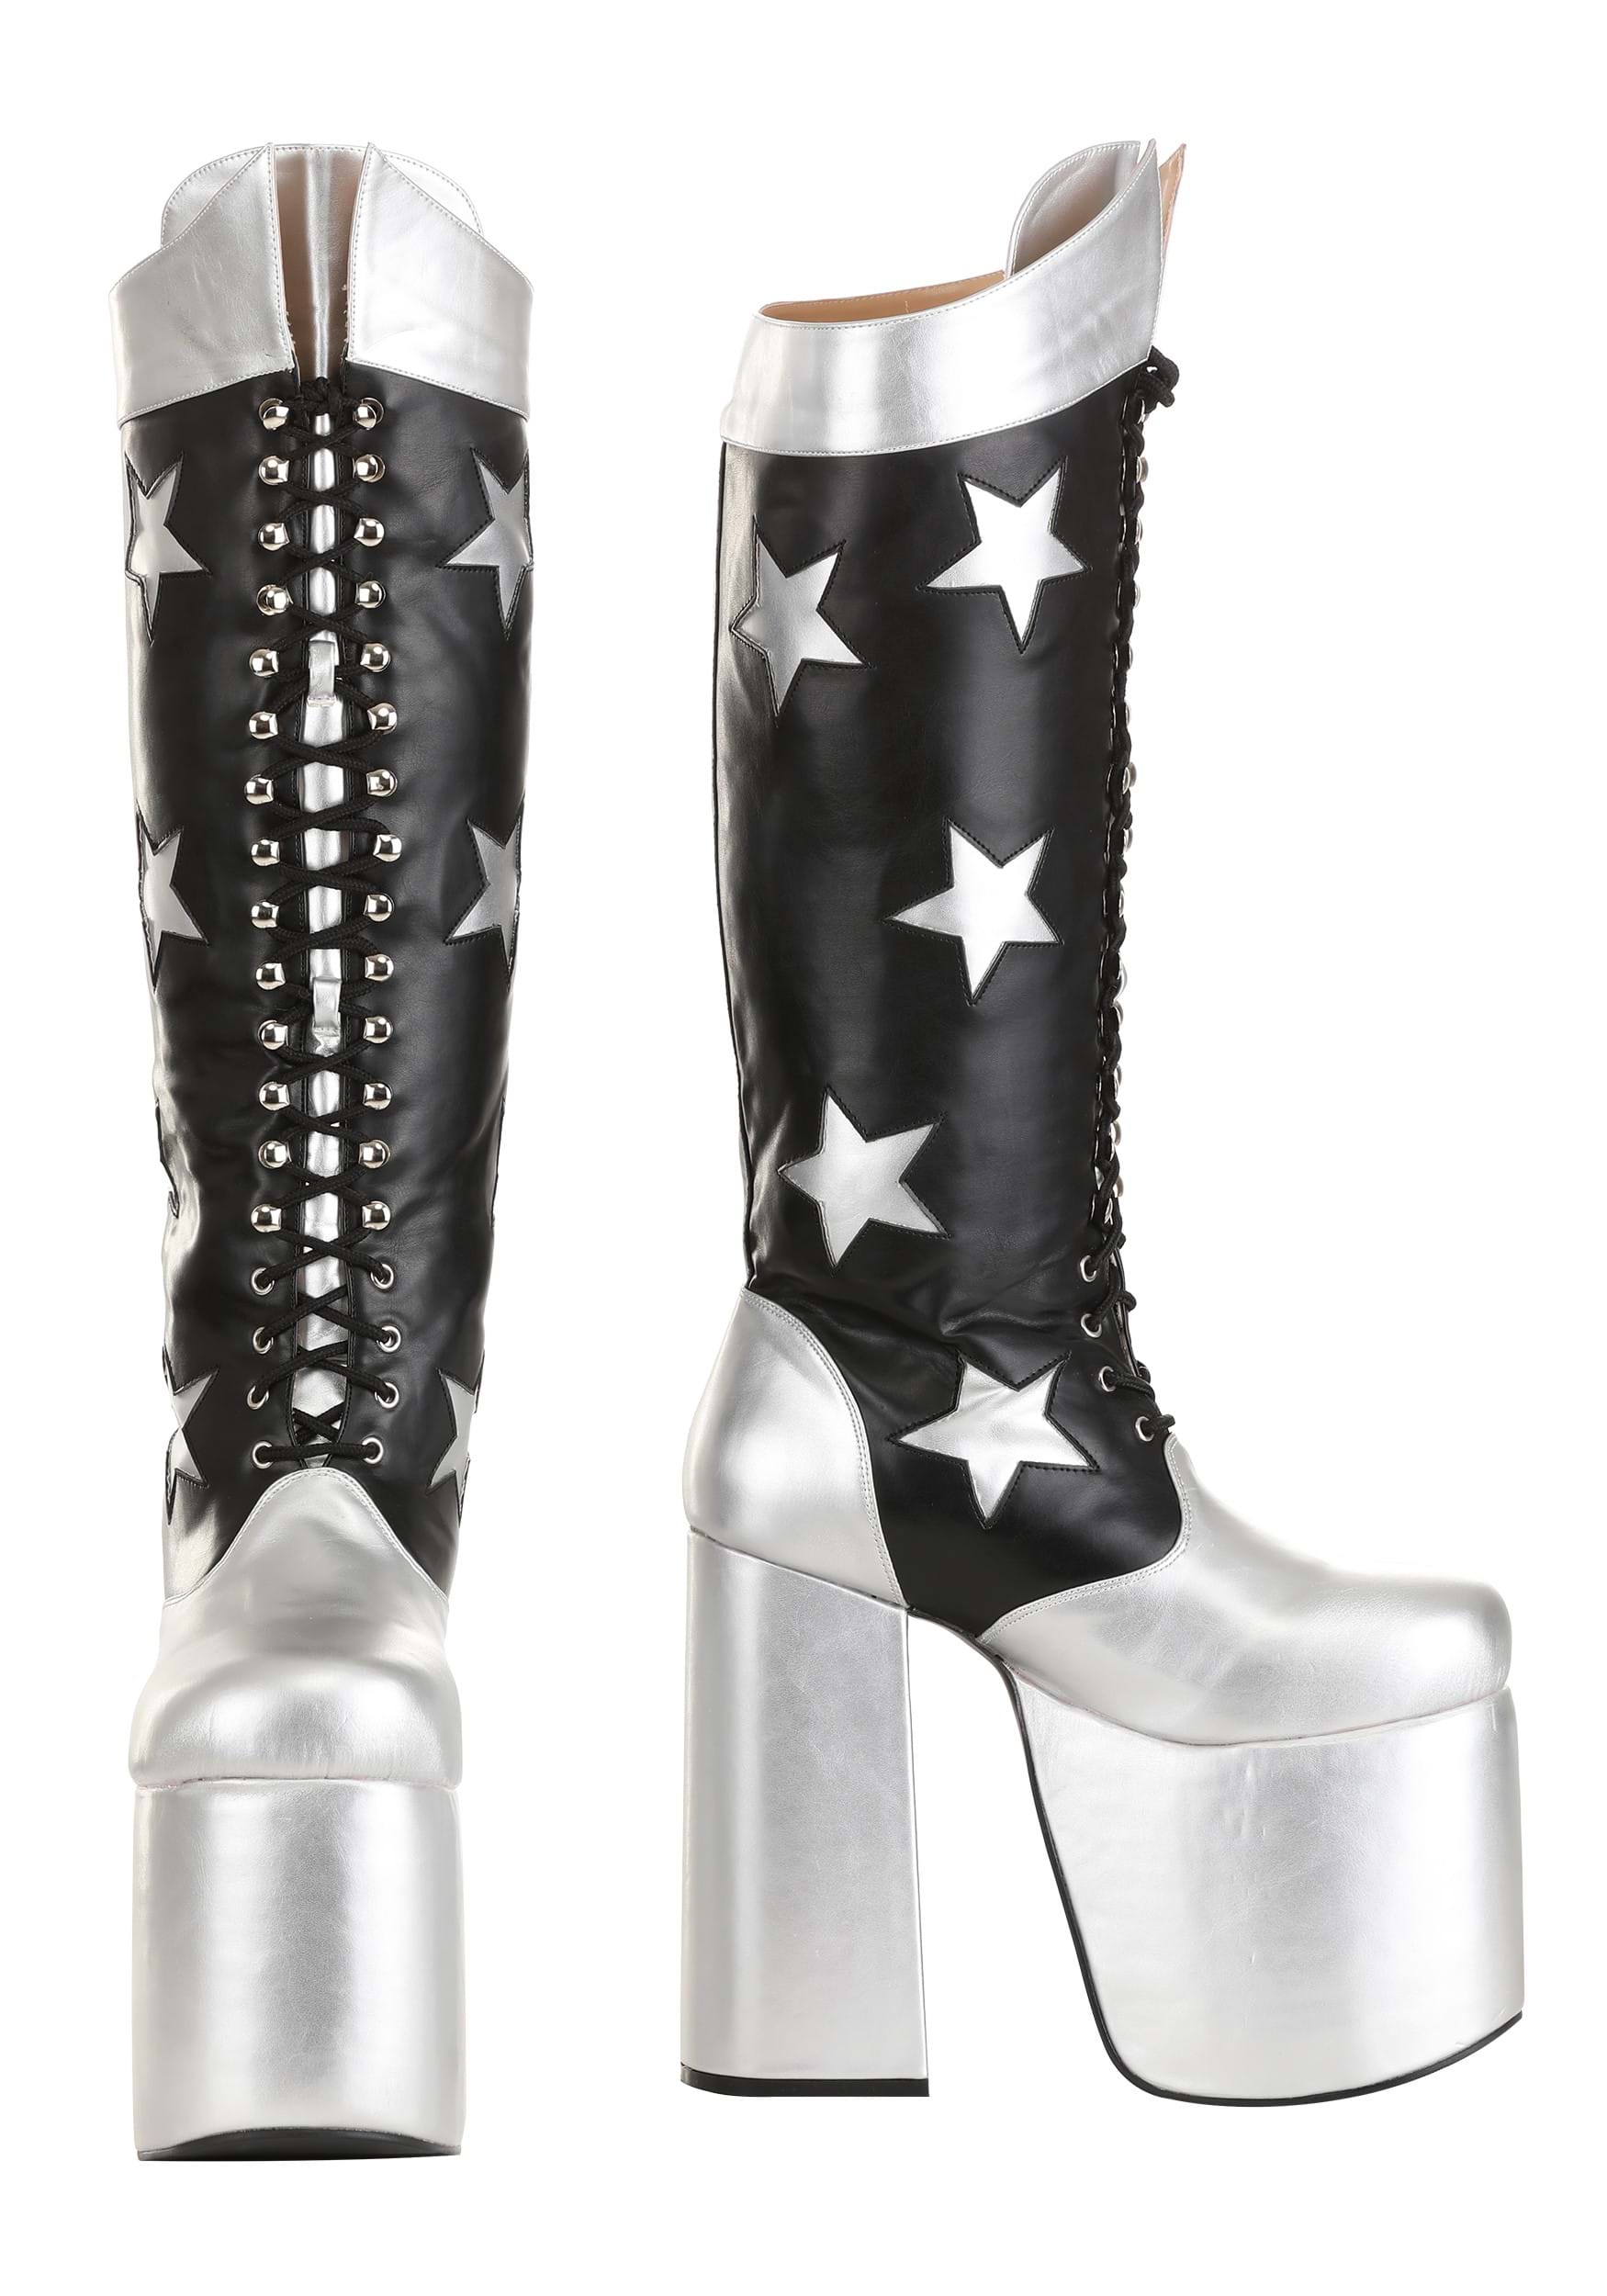 KISS Starchild Boots , Exclusive Costume Boots